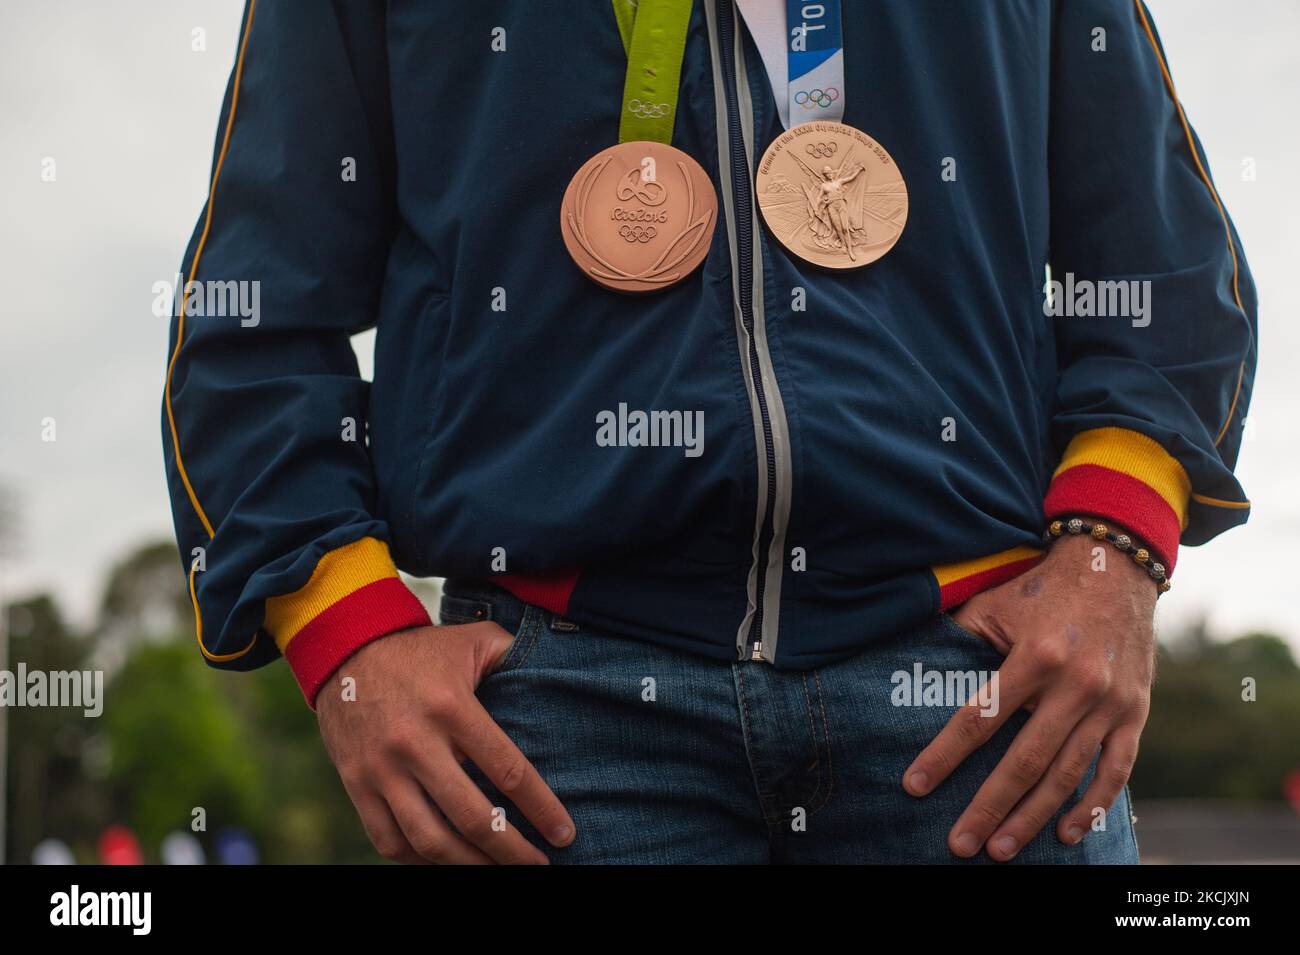 Carlos Ramirez poses for a photo with his two bronze medals from the Rio 2016 Olympics and 2020+1 Tokyo Olympics during the name inauguration of the Carlos Ramirez BMX track named after Carlos Ramirez bronze Olympic Medal winner during the Tokyo 2020+1 Olympics, in Bogota, Colombia, on August 18, 2021. (Photo by Sebastian Barros/NurPhoto) Stock Photo